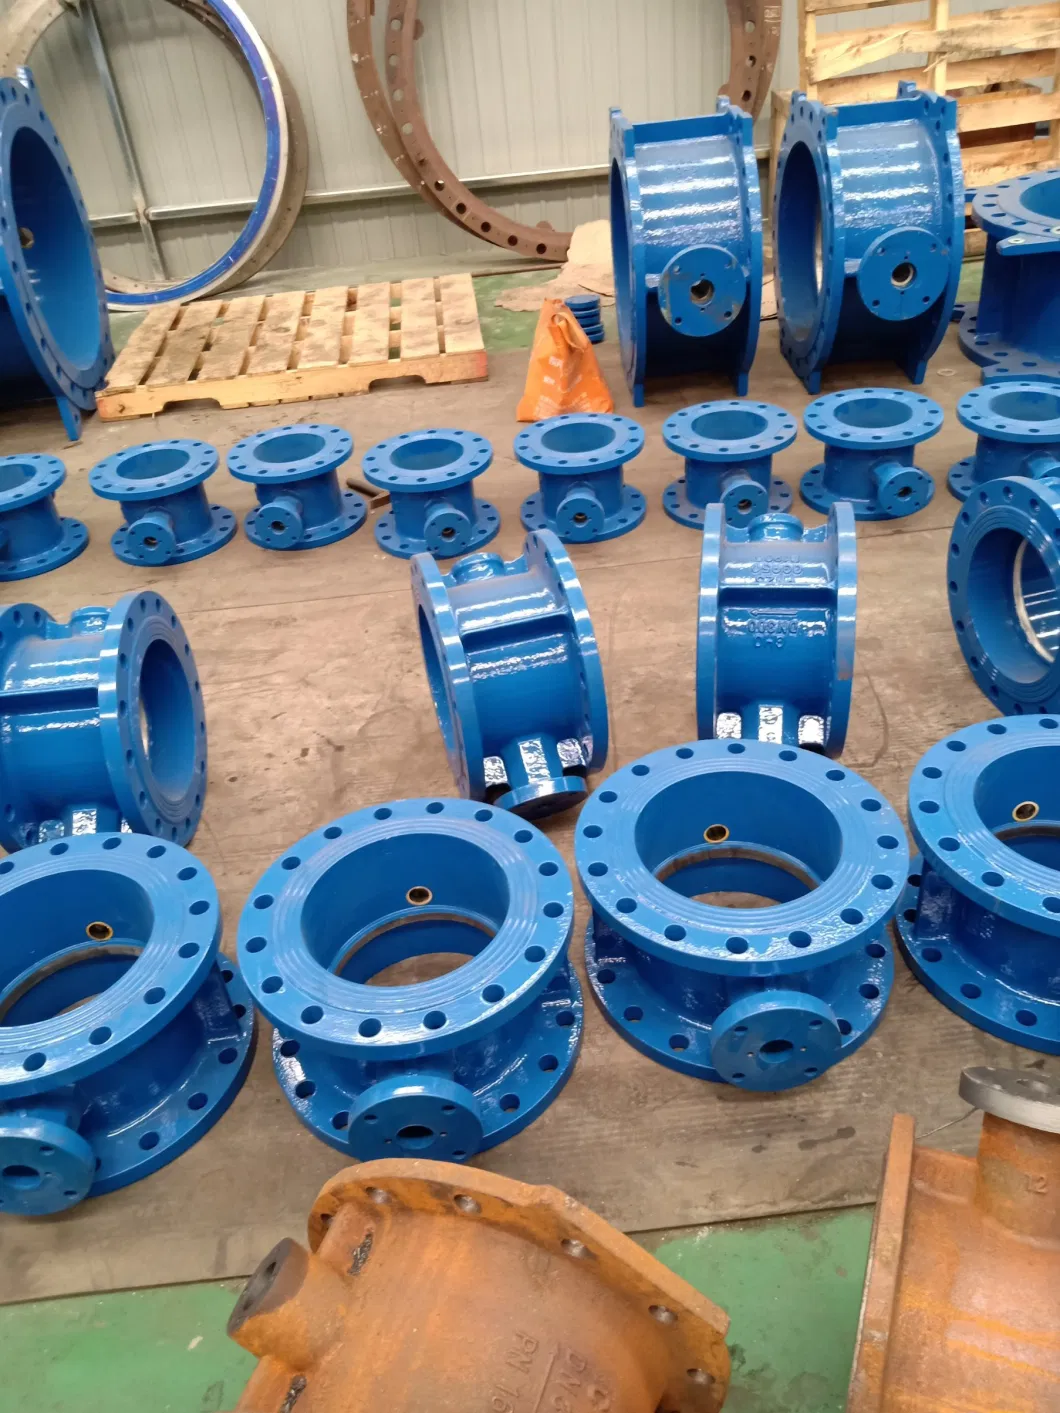 API609 JIS F7480 BS5156 V En558 Series 13/14 Short/Long Structure Double Eccentric Flanged Di Body Butterfly Valve Manual Operation Hand Lever Handle Gear Box